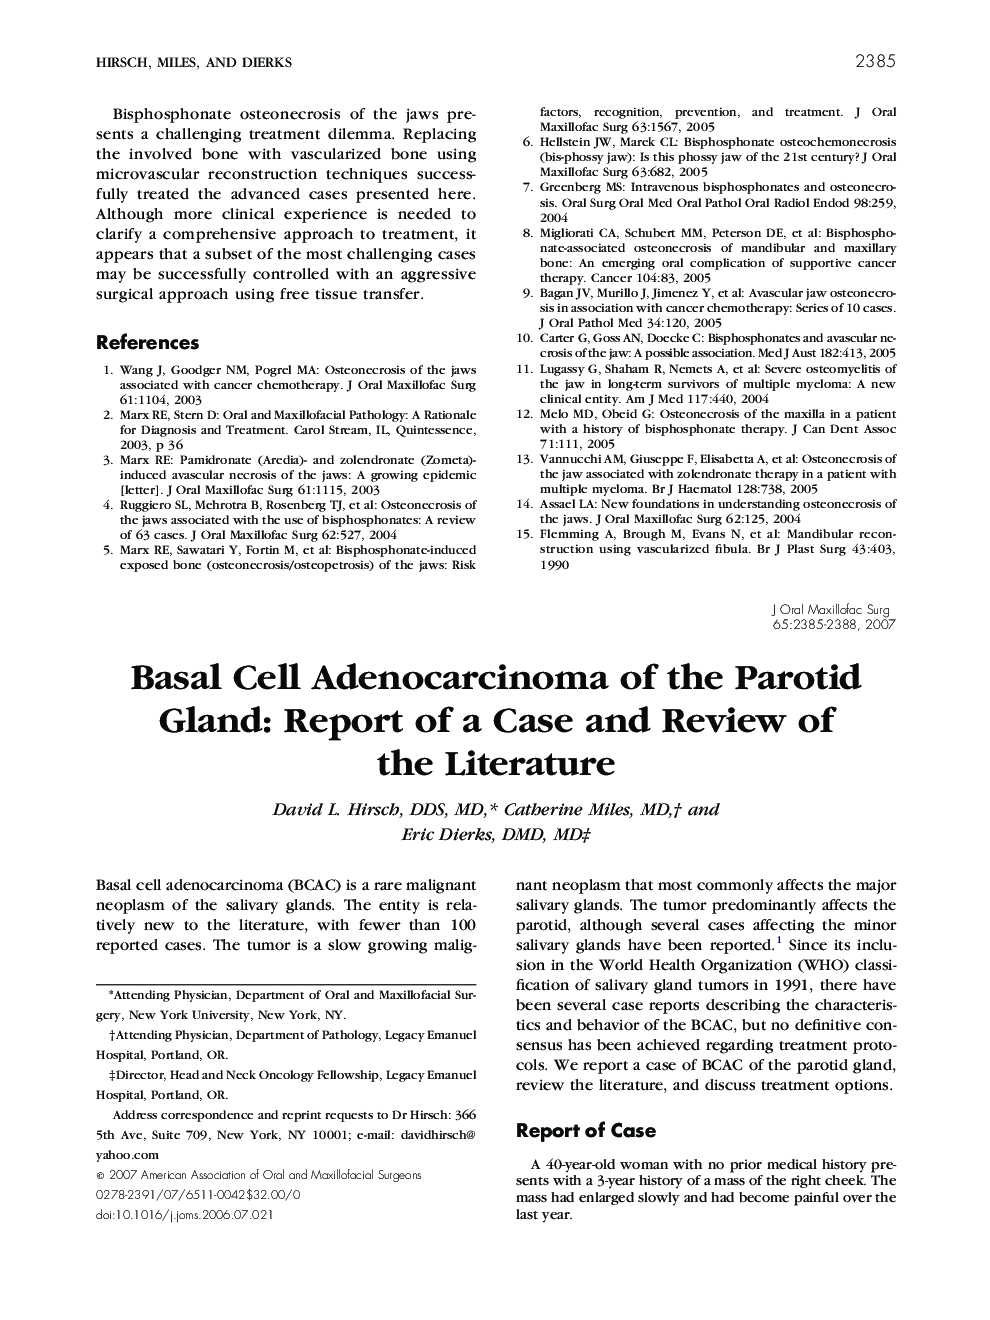 Basal Cell Adenocarcinoma of the Parotid Gland: Report of a Case and Review of the Literature